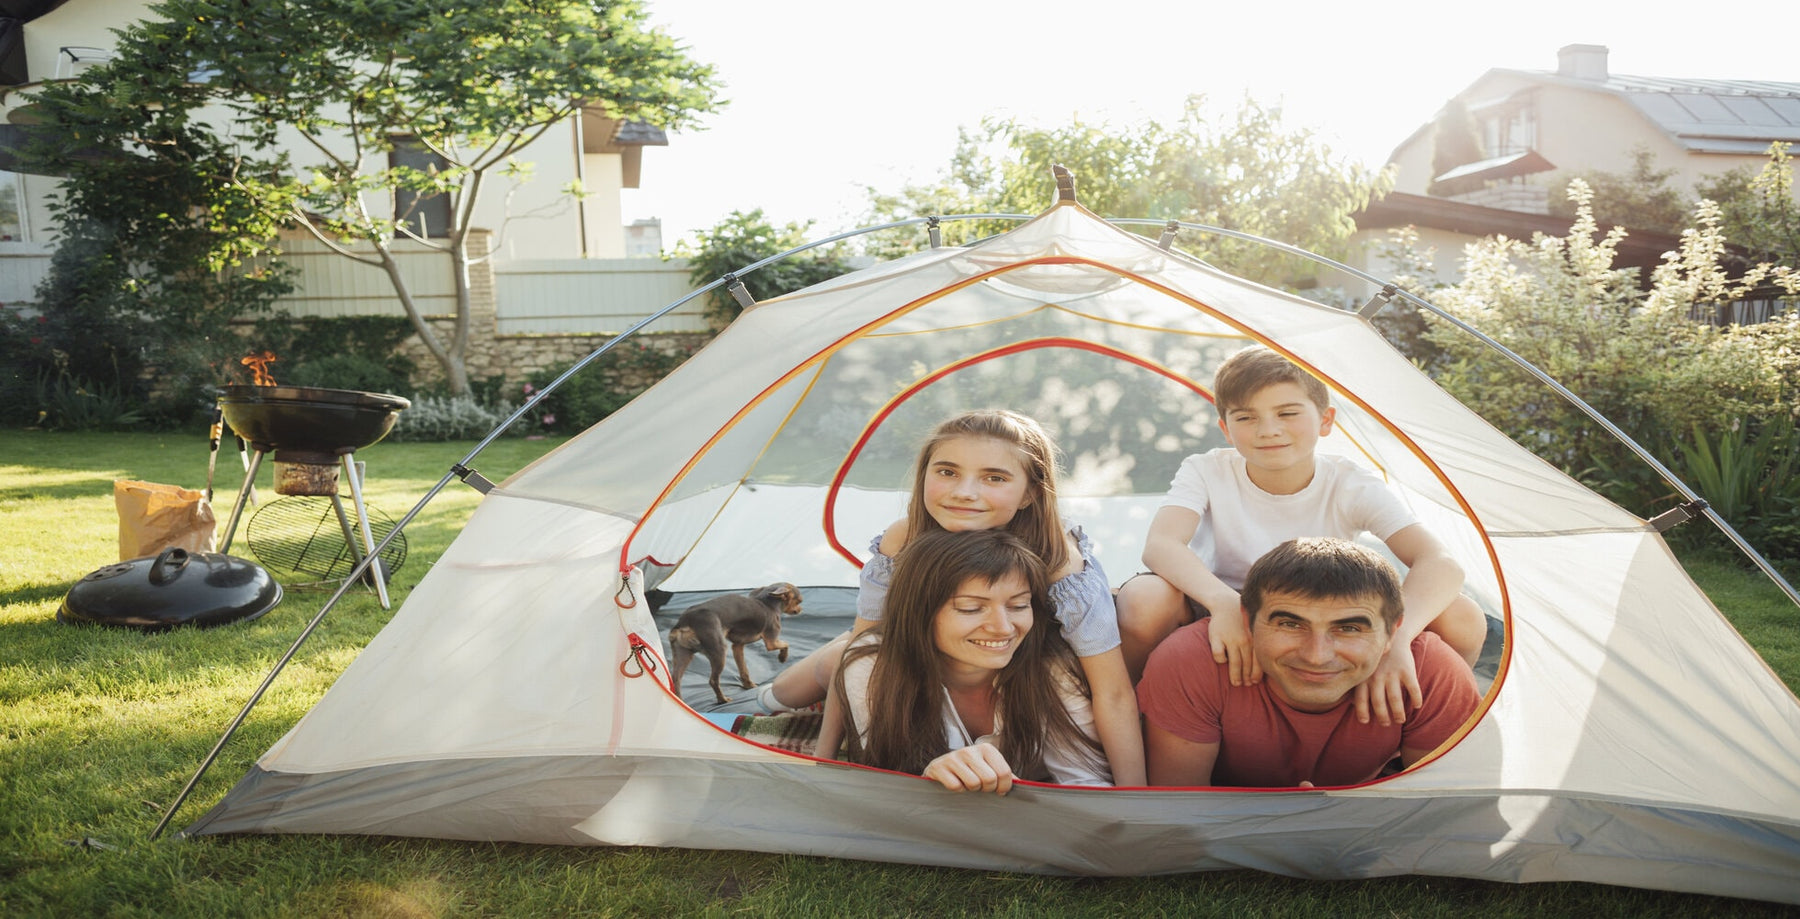 Backyard camping with family